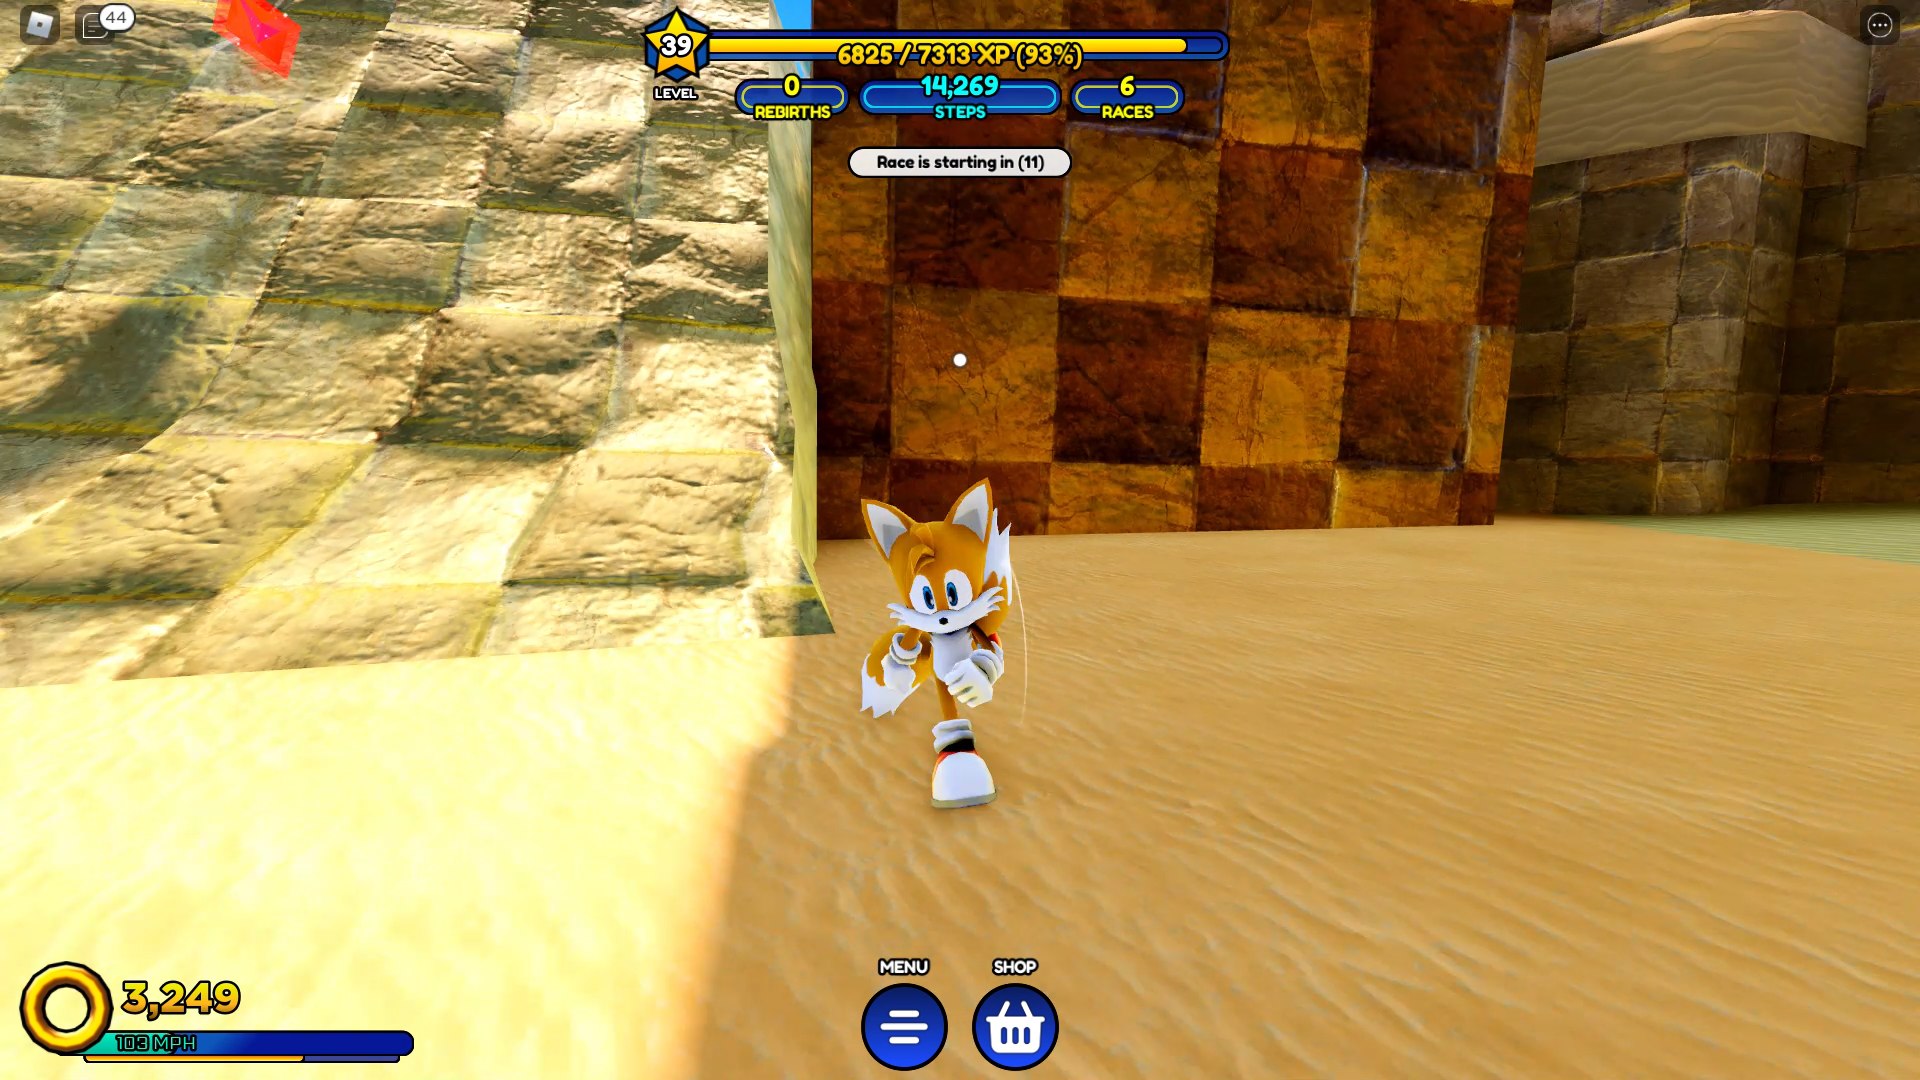 Sonic Speed Simulator review - Tails running towards the camera on a sandy desert level.